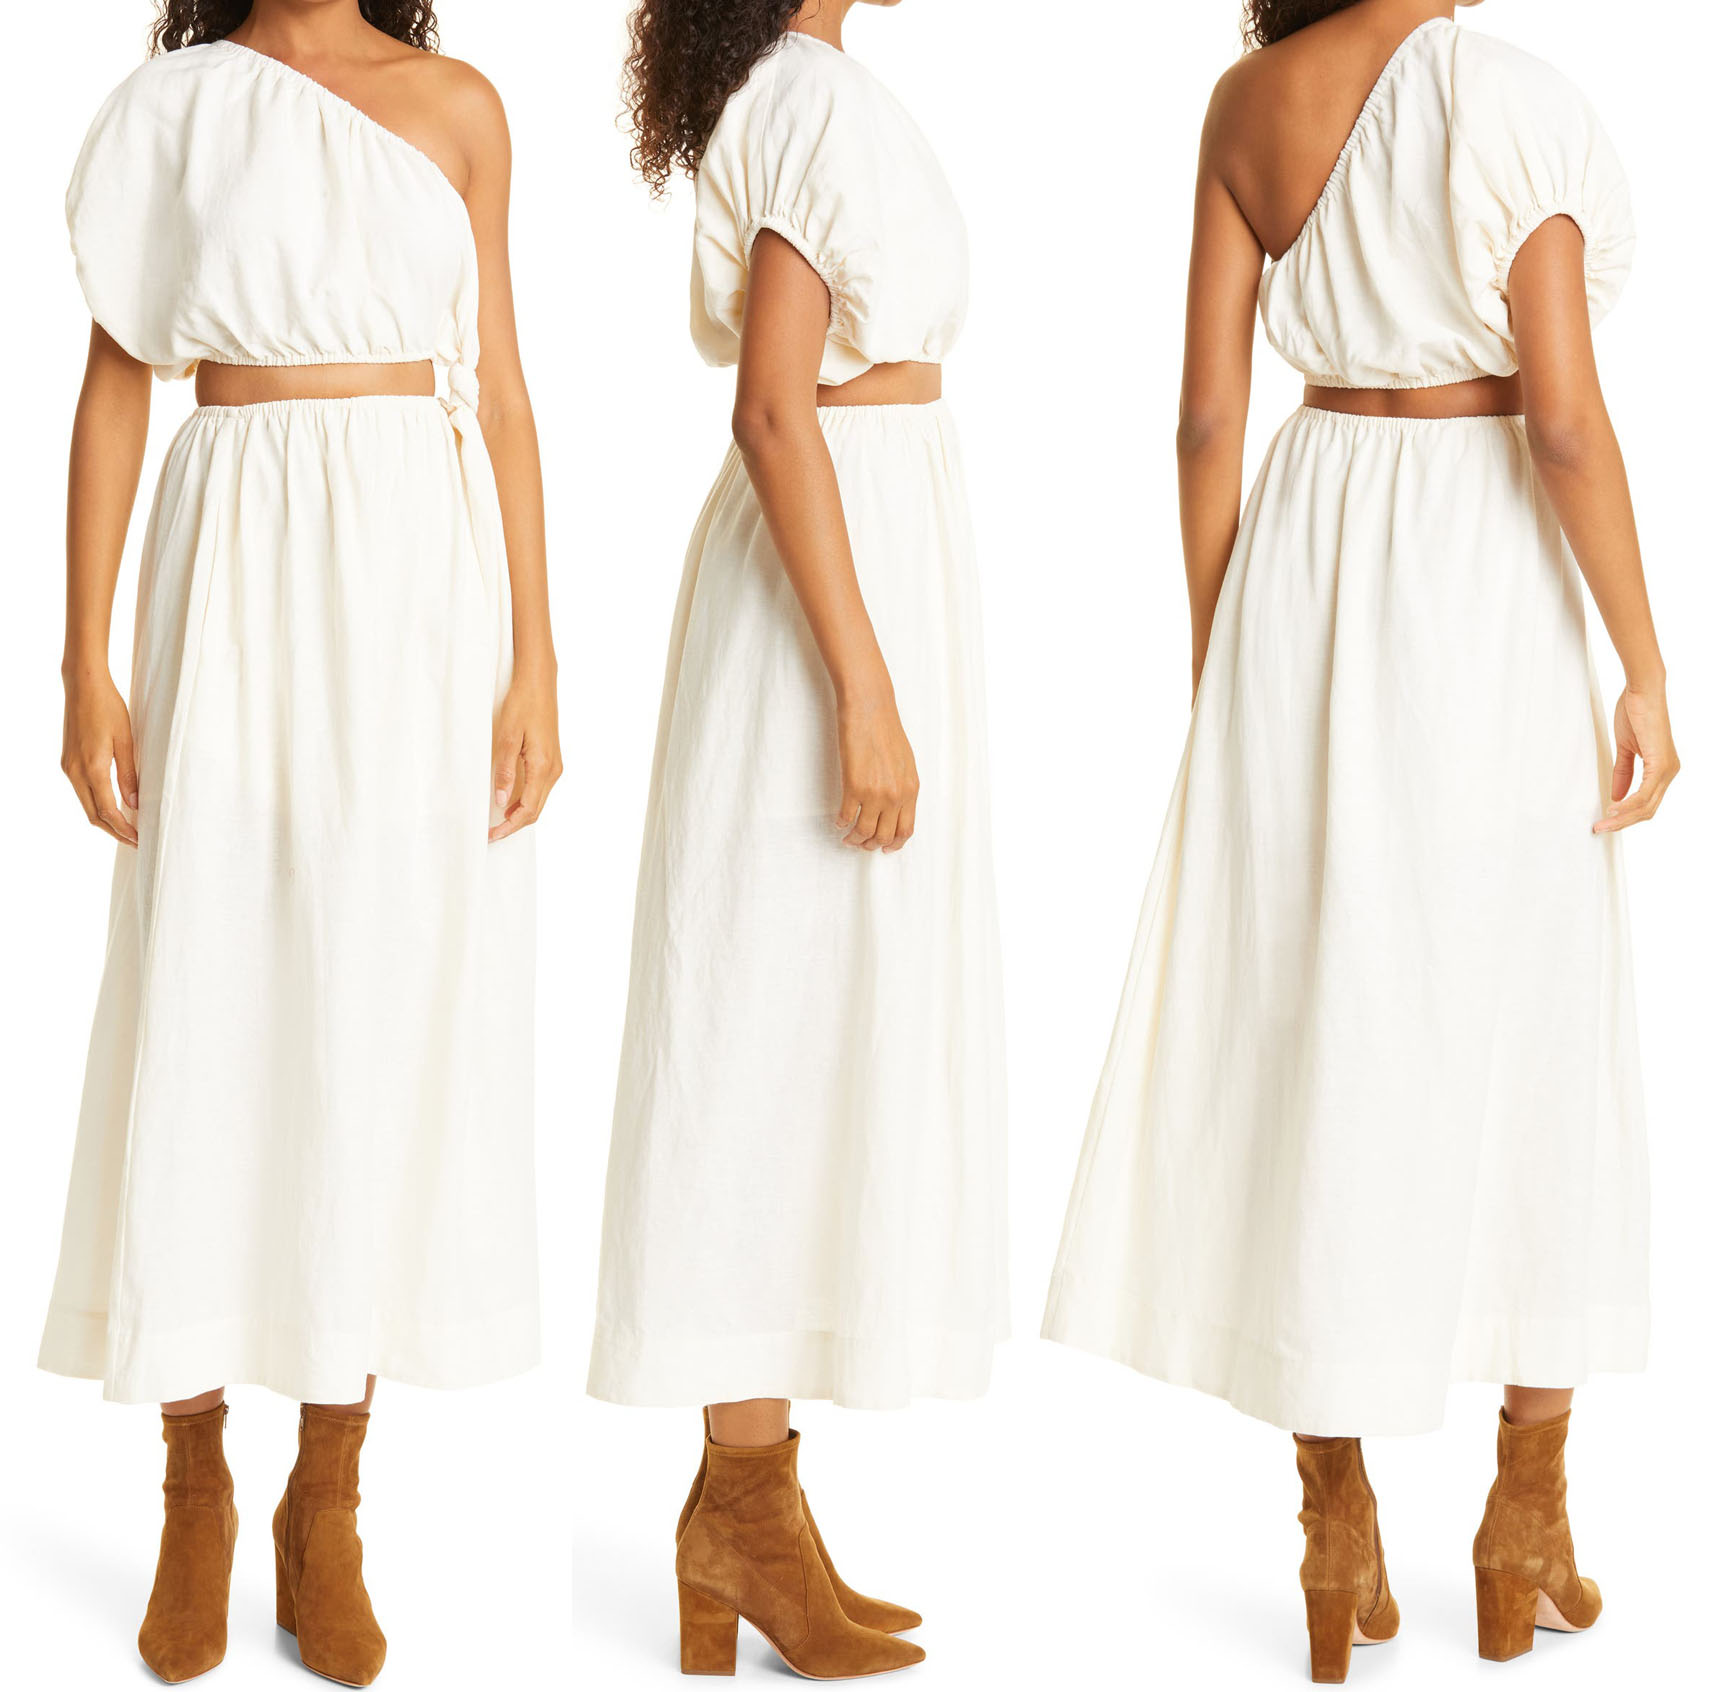 Add a sultry element to a summery look with this breezy one-shoulder dress designed with a cutout detail at the waist